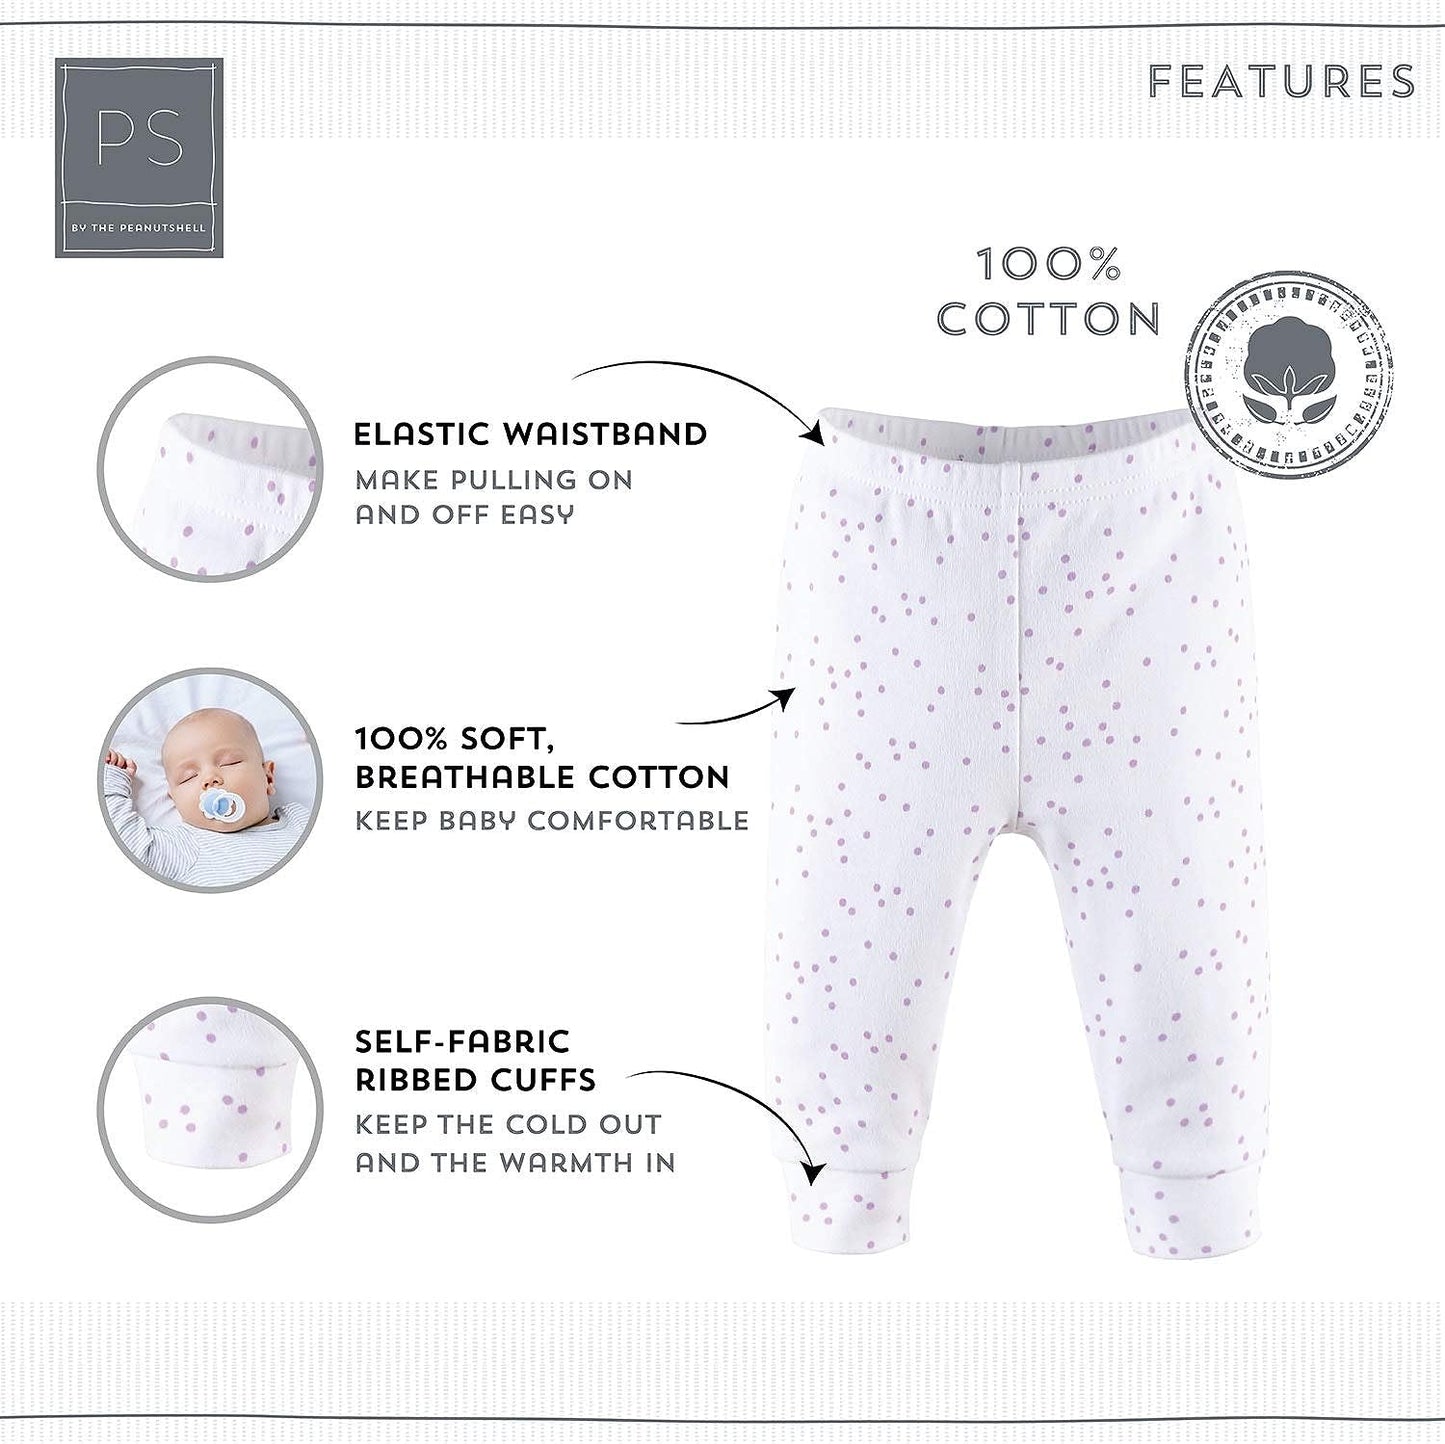 The Peanutshell Baby Girl Pants Set | 5 Pack in Newborn to 24 Month Sizes | Floral, Pink, White, Stars